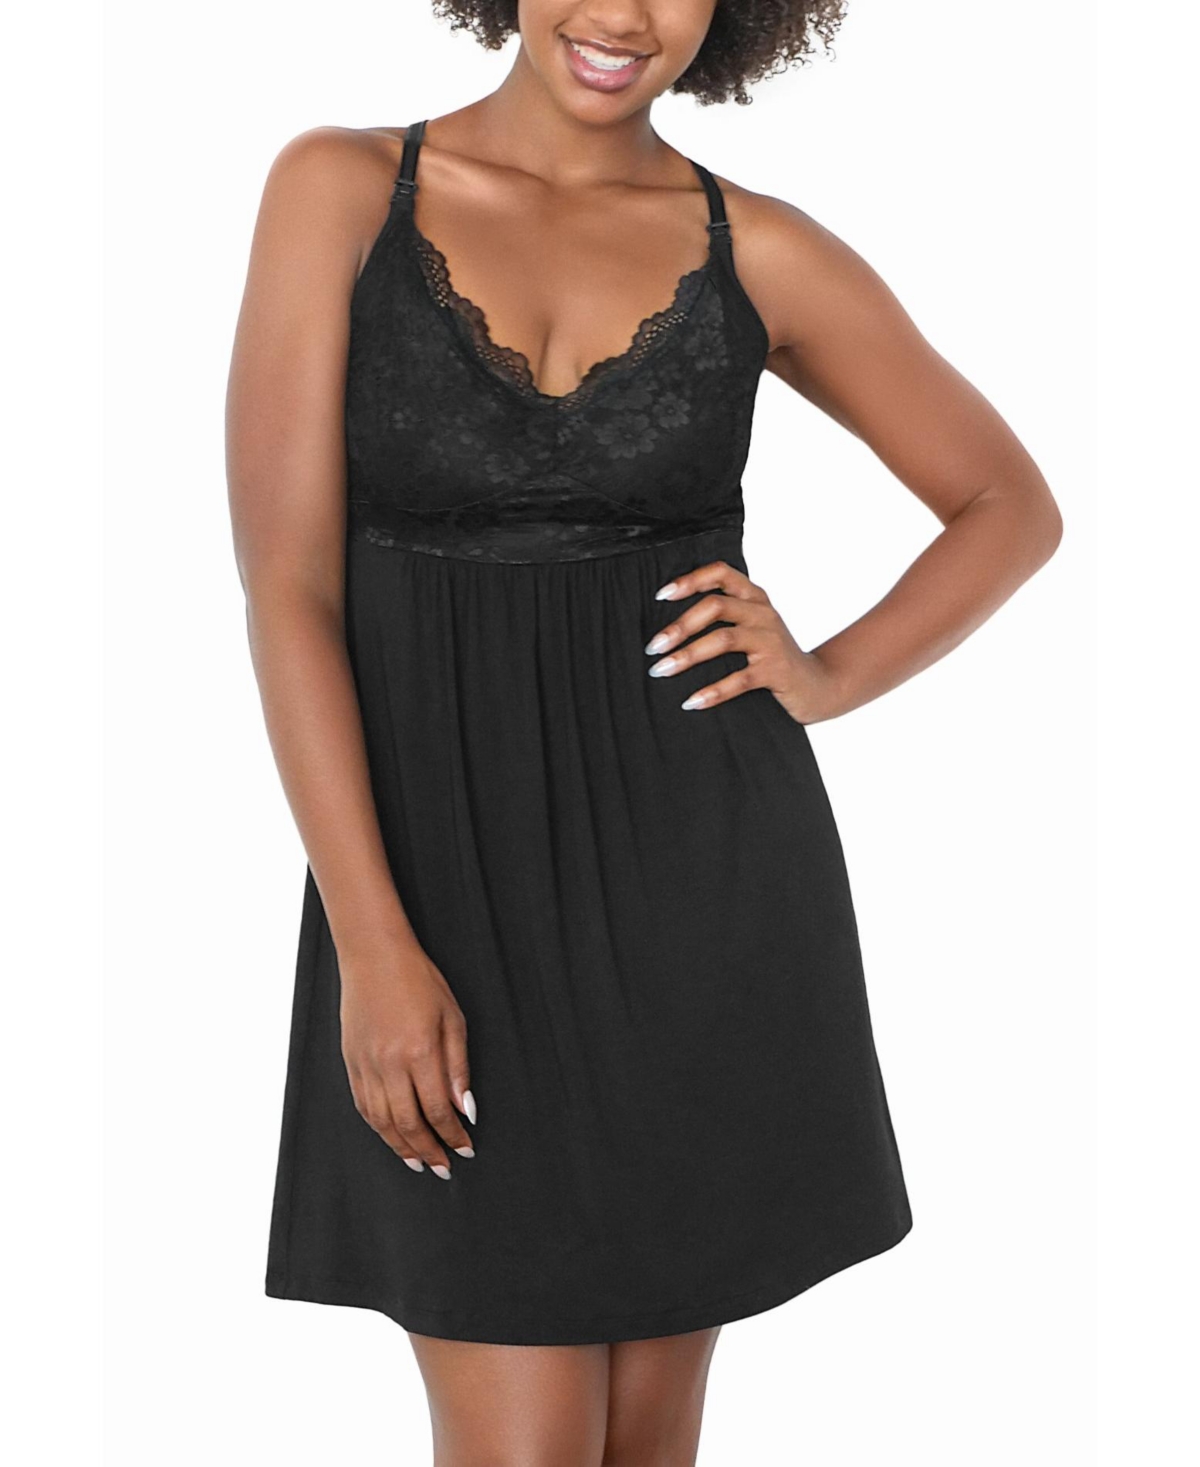 Women's Plus Size Lucille Lace Maternity & Nursing Nightgown - With Clip Down Cups - Black